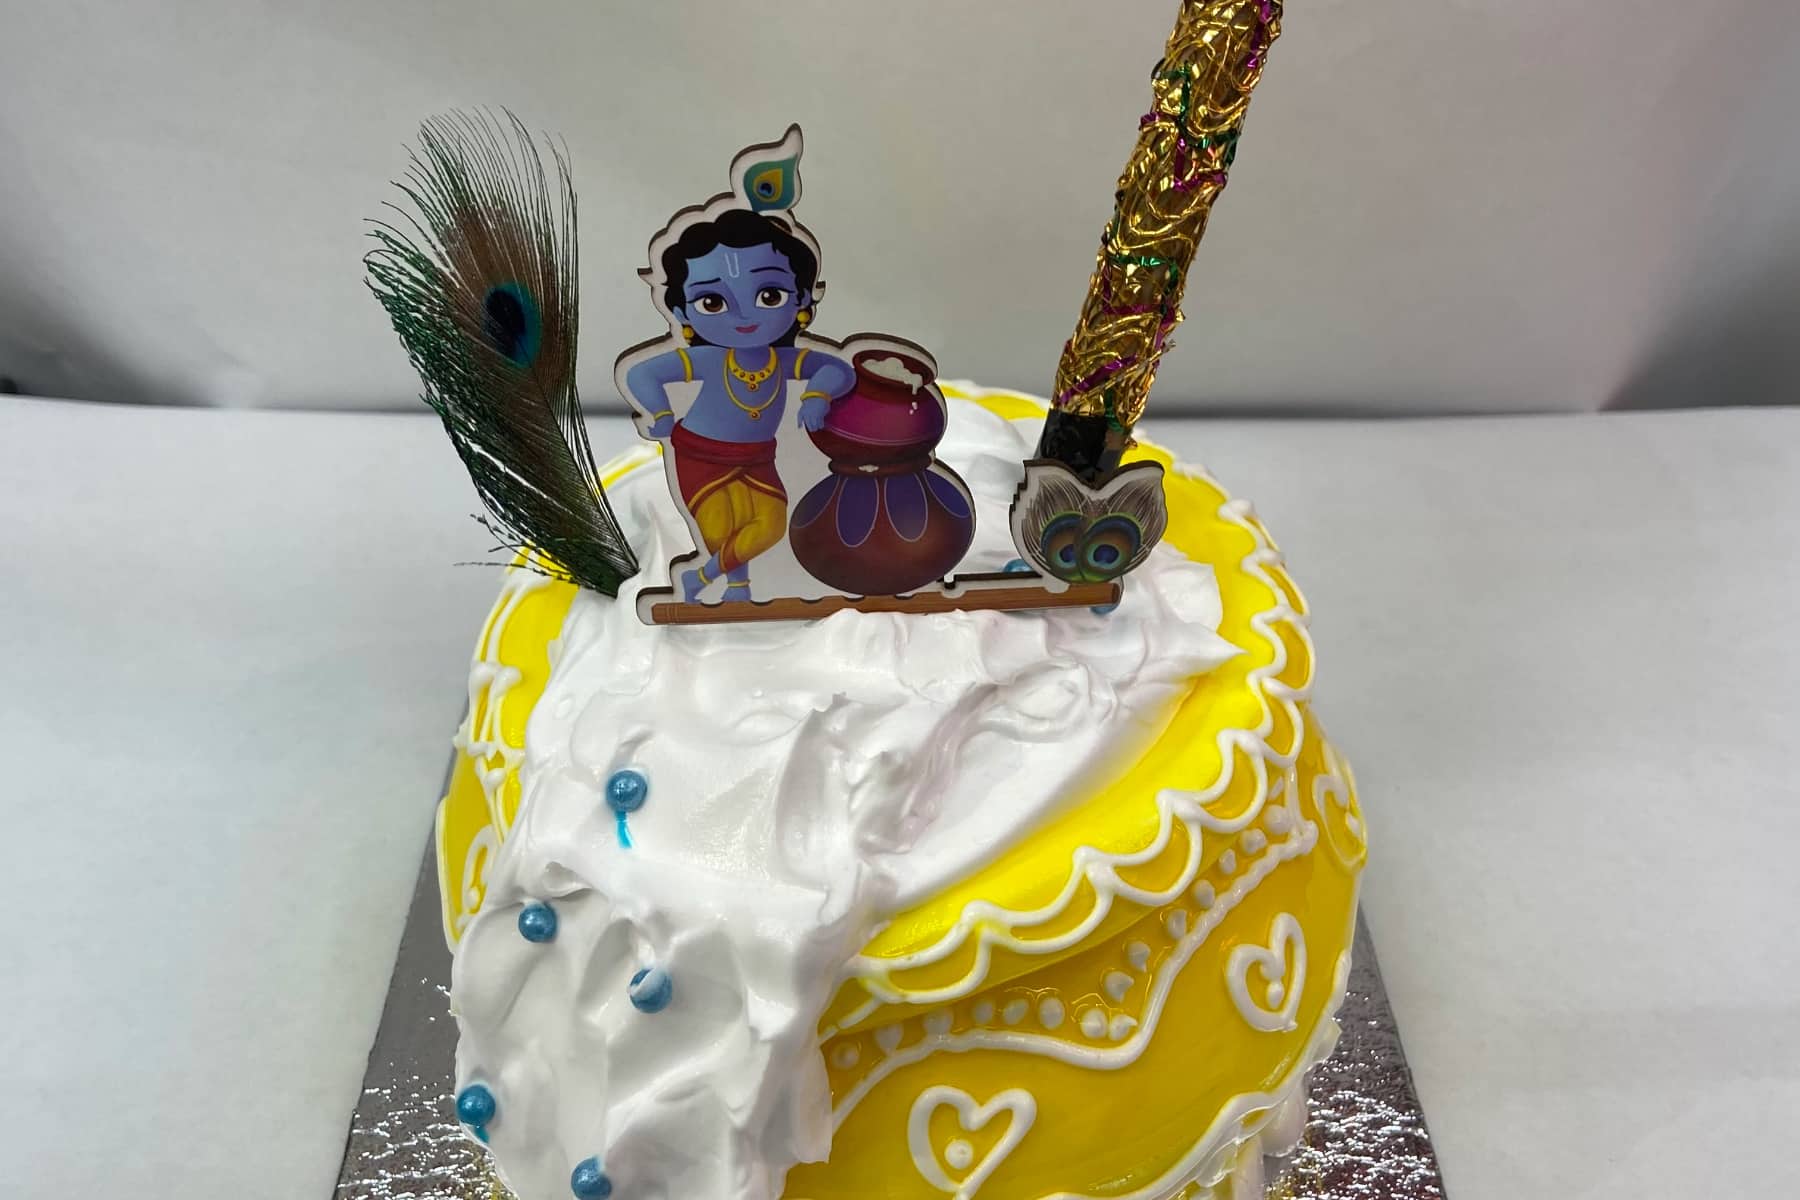 Krishna Theme Tier Cake Delivery Chennai, Order Cake Online Chennai, Cake  Home Delivery, Send Cake as Gift by Dona Cakes World, Online Shopping India